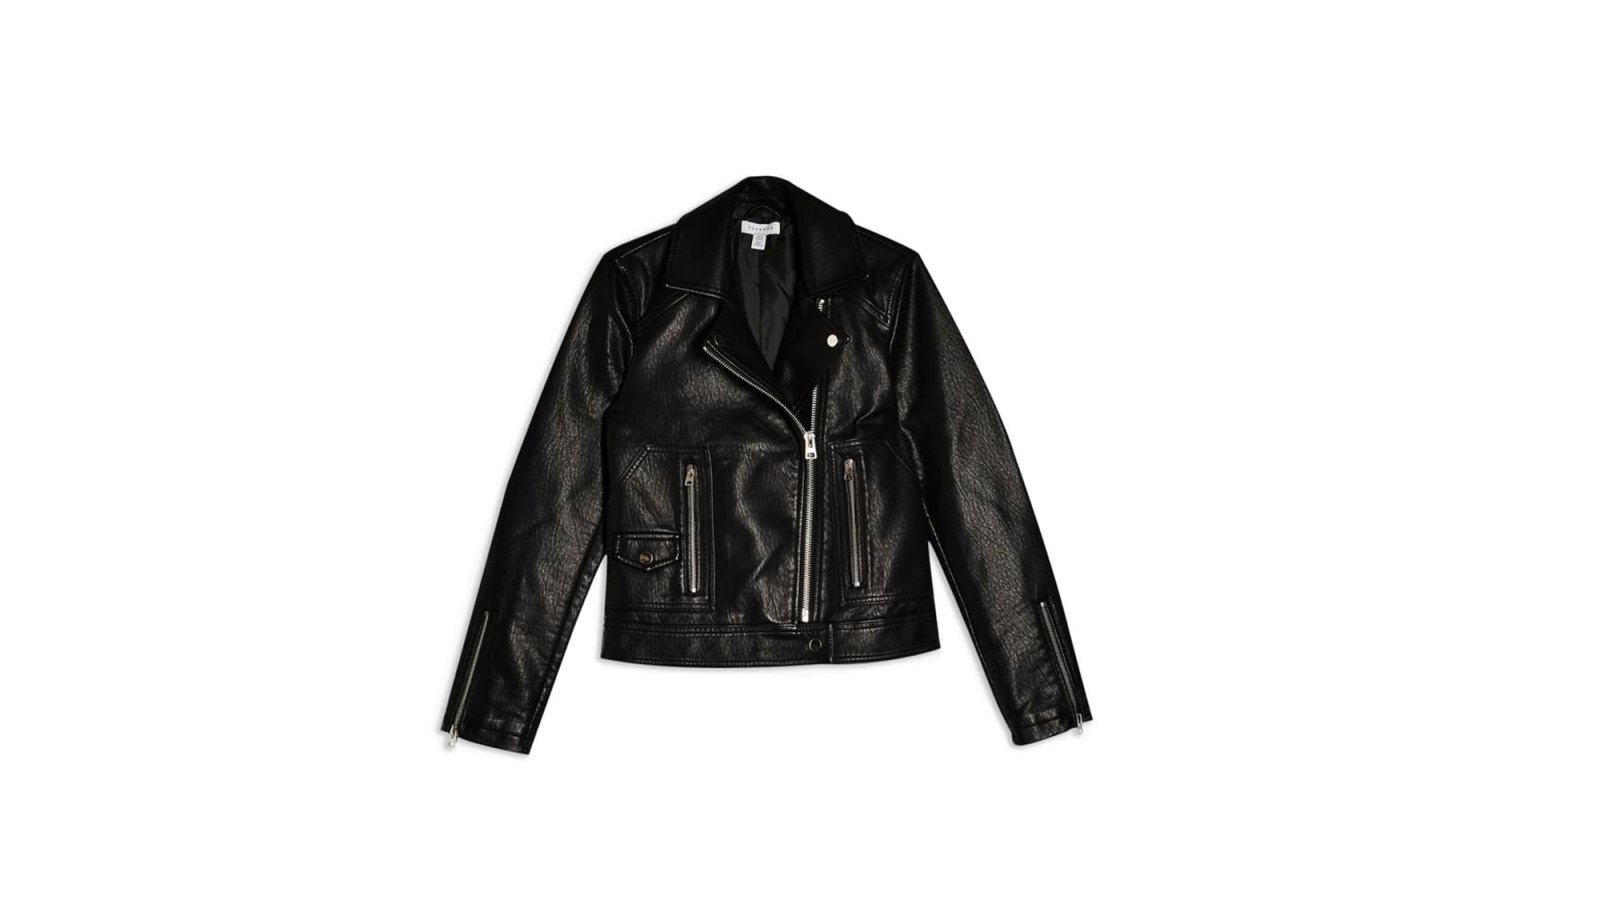 We Need This Topshop Biker Jacket in Our Wardrobes ASAP!